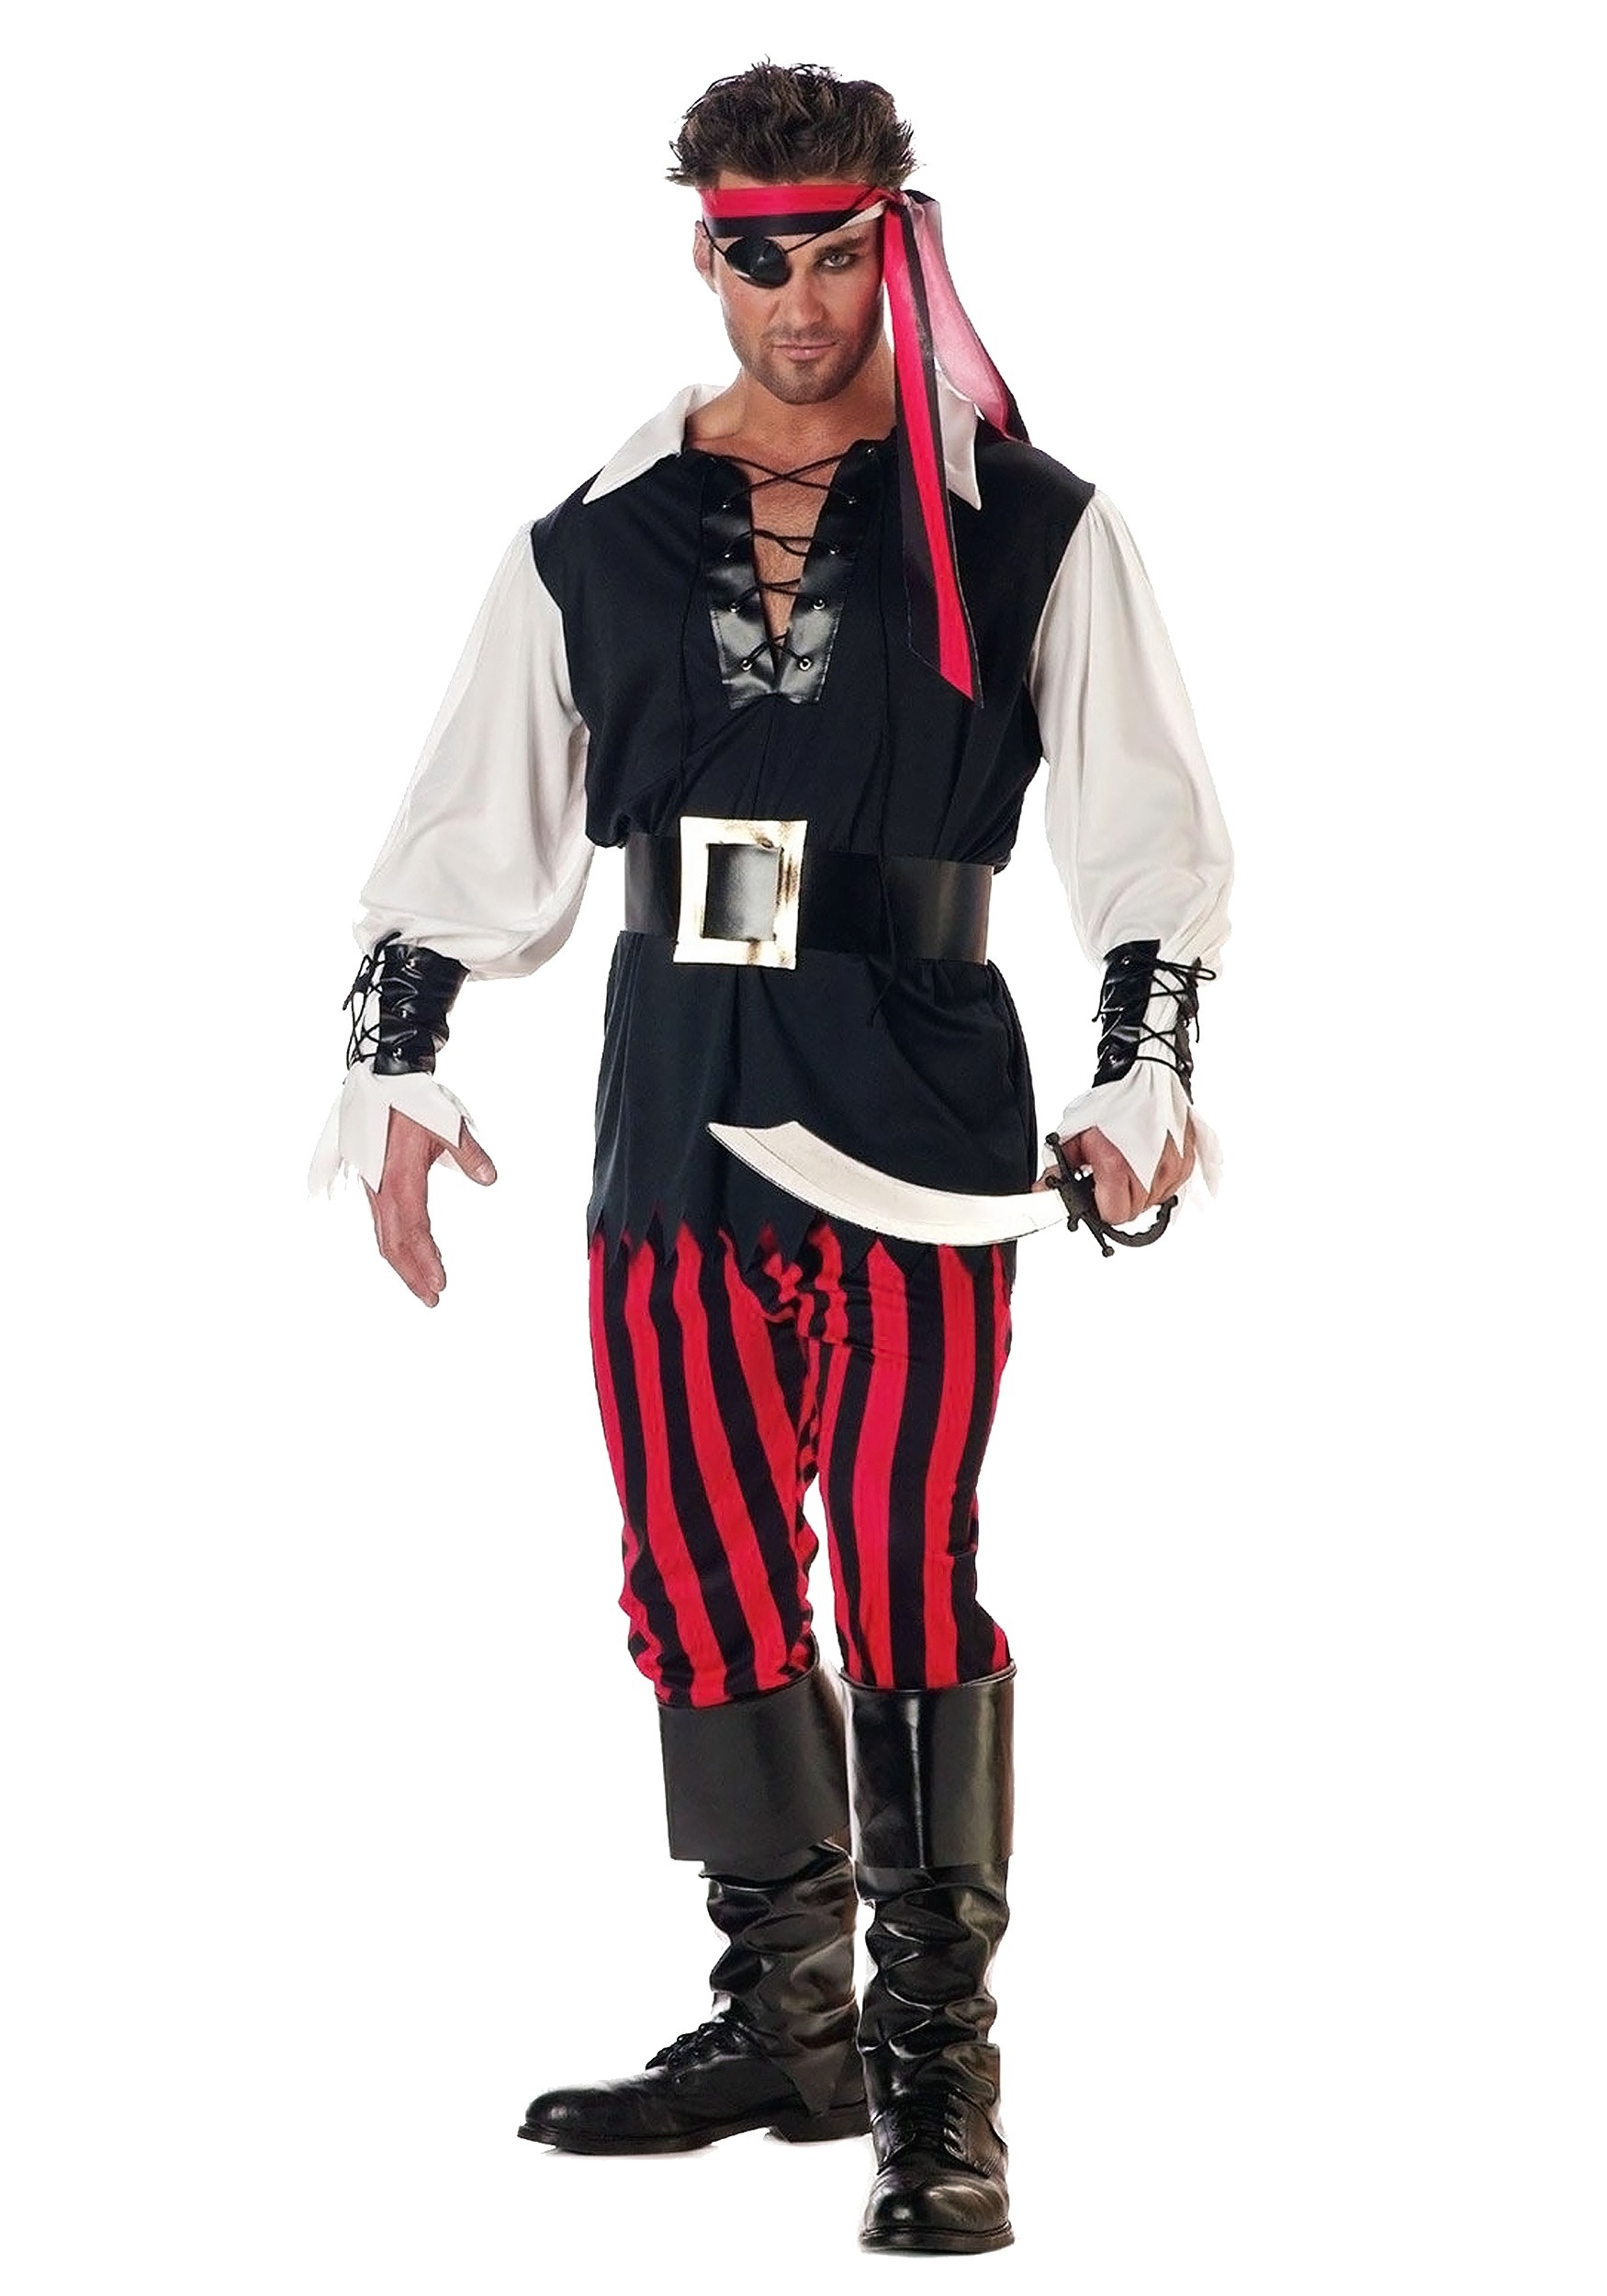 Photos - Fancy Dress California Costume Collection Cutthroat Pirate Costume for Men Black CA013 